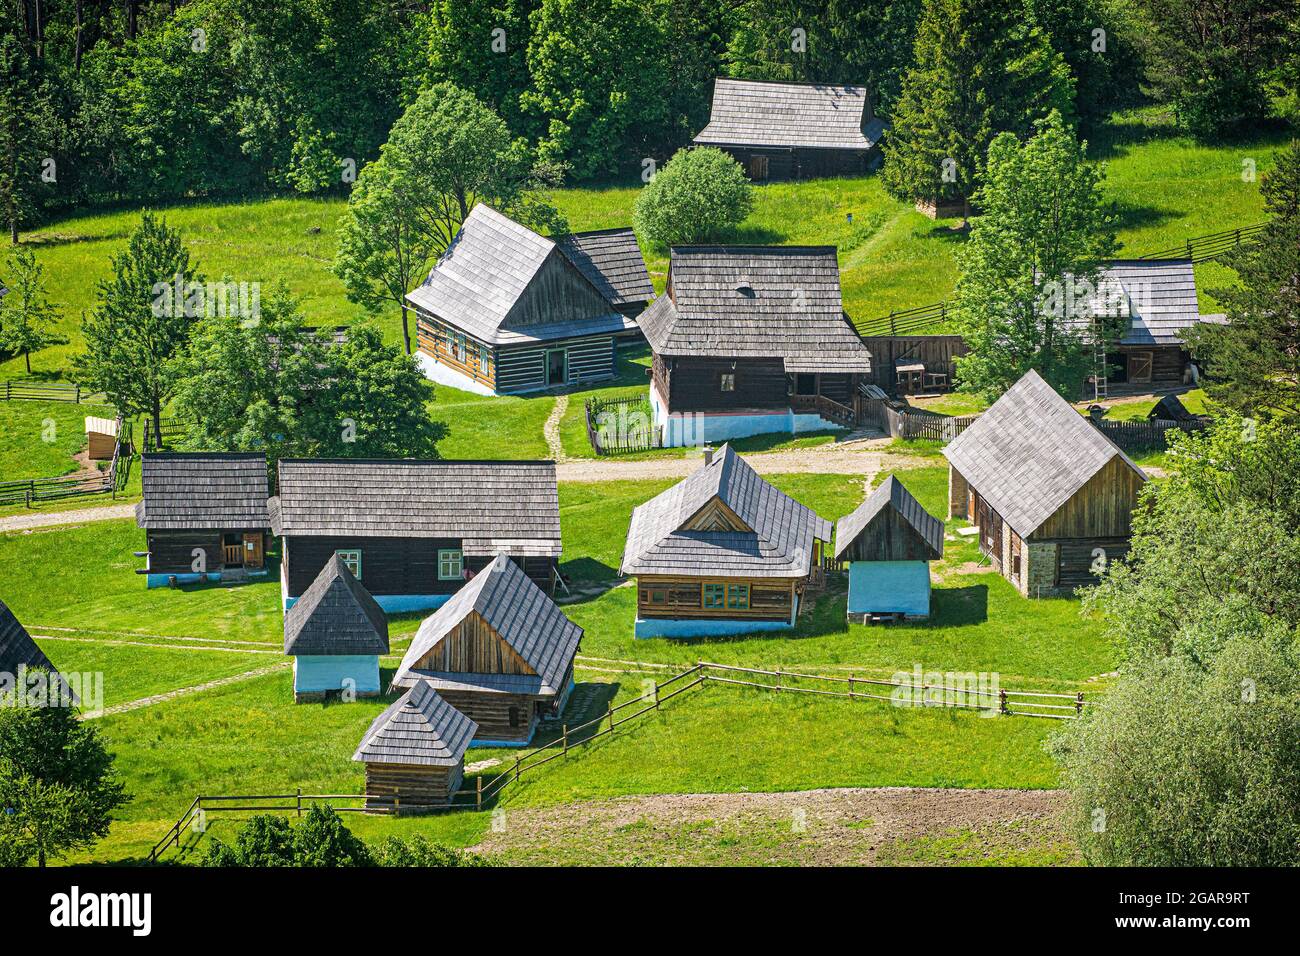 Open-air museum in Stara Lubovna, Slovak republic. Architectural theme. Aerial view. Stock Photo